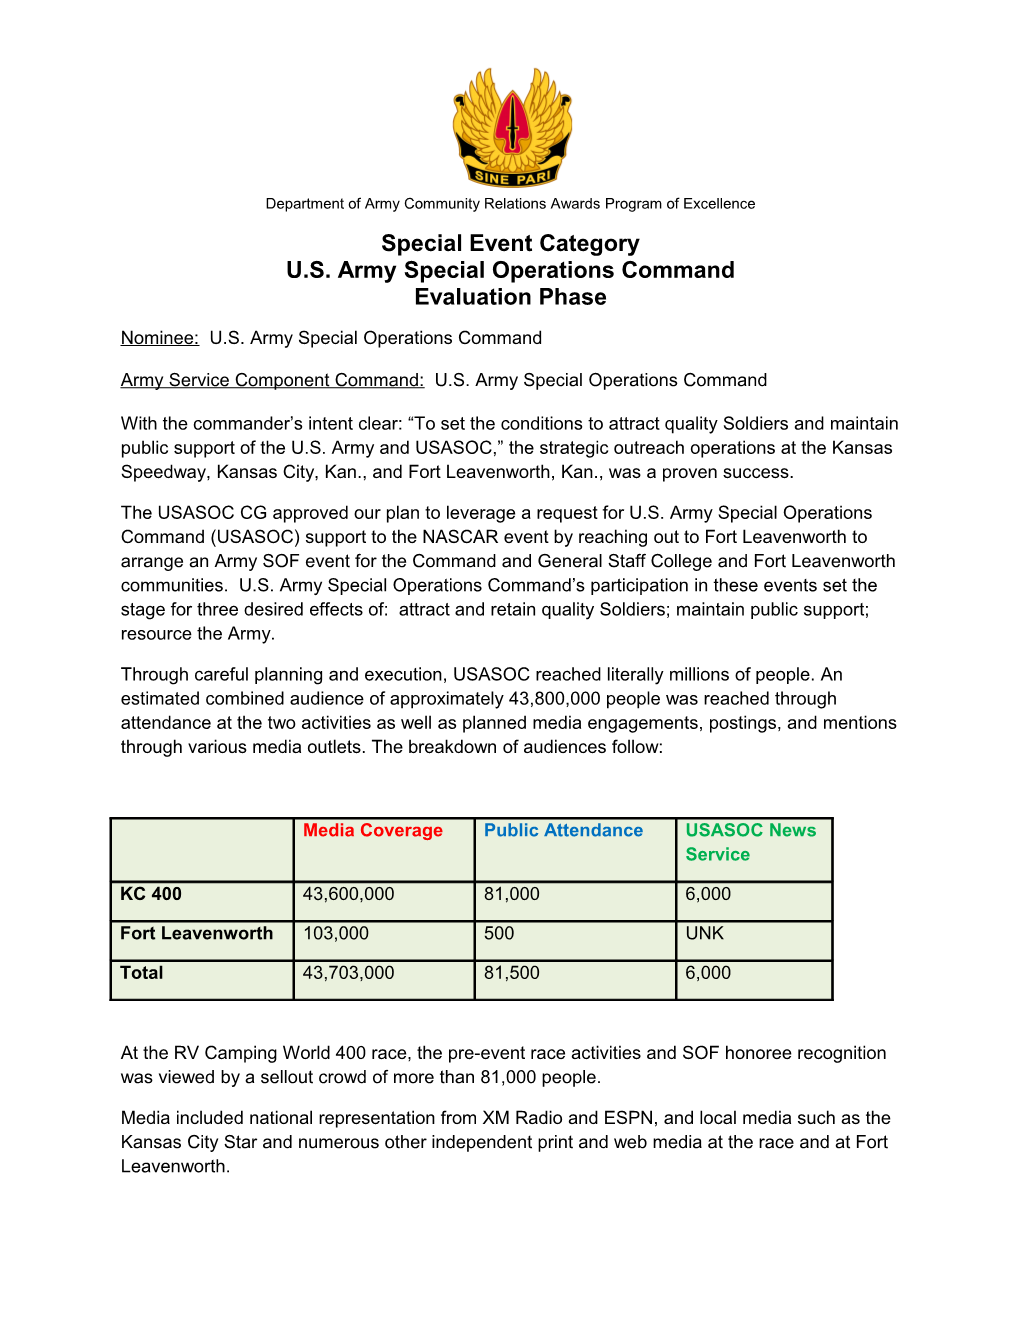 USASOC Kansas Speedway and Fort Leavenworth Outreach Project, Department of Army Community